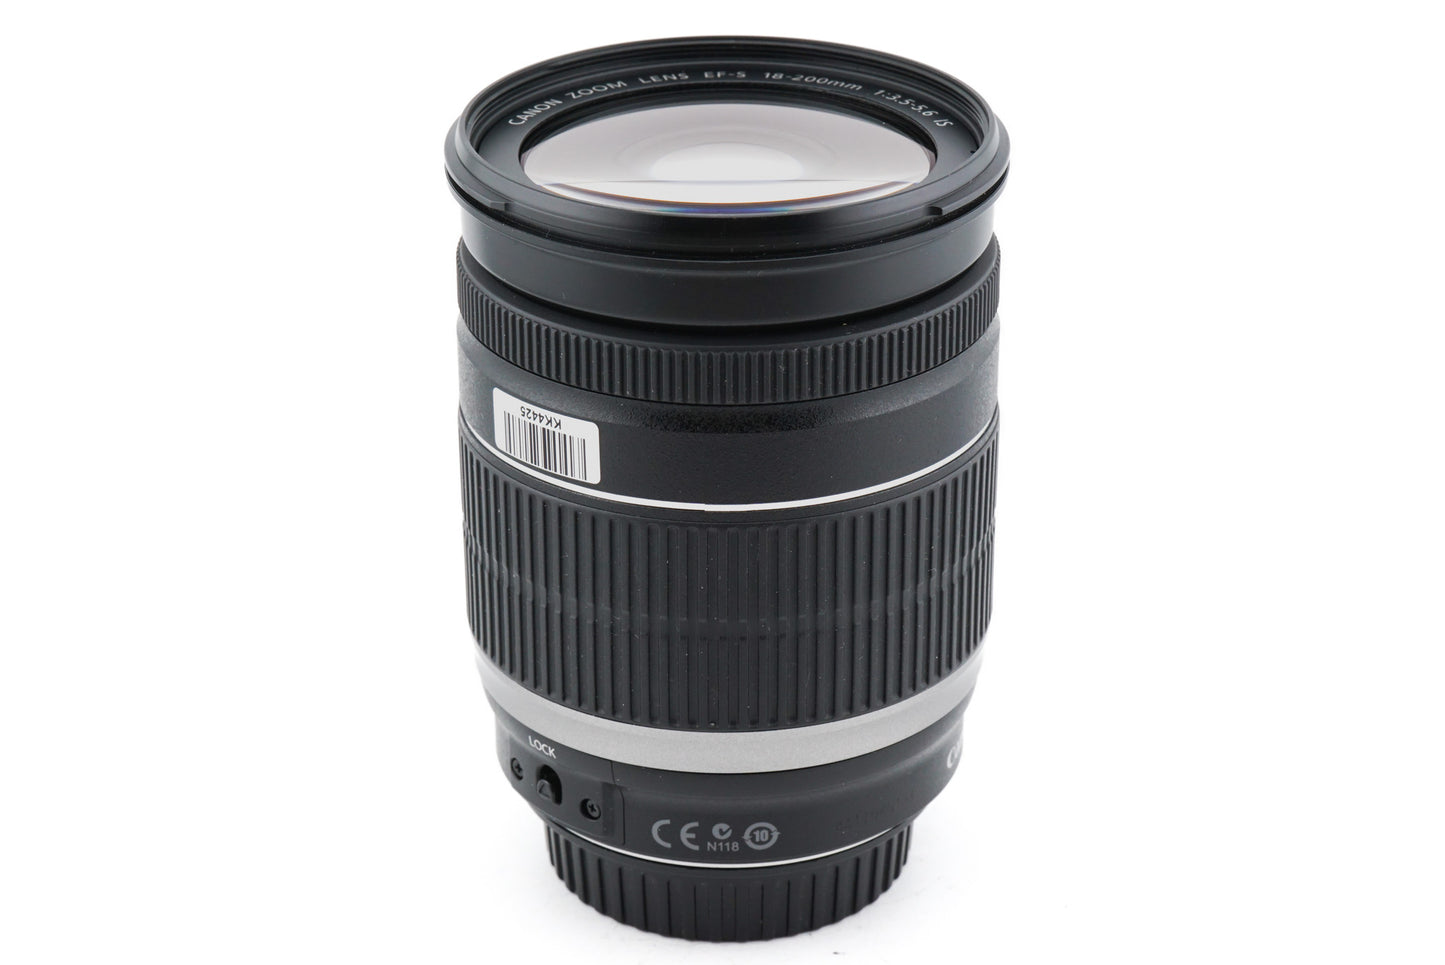 Canon 18-200mm f3.5-5.6 IS